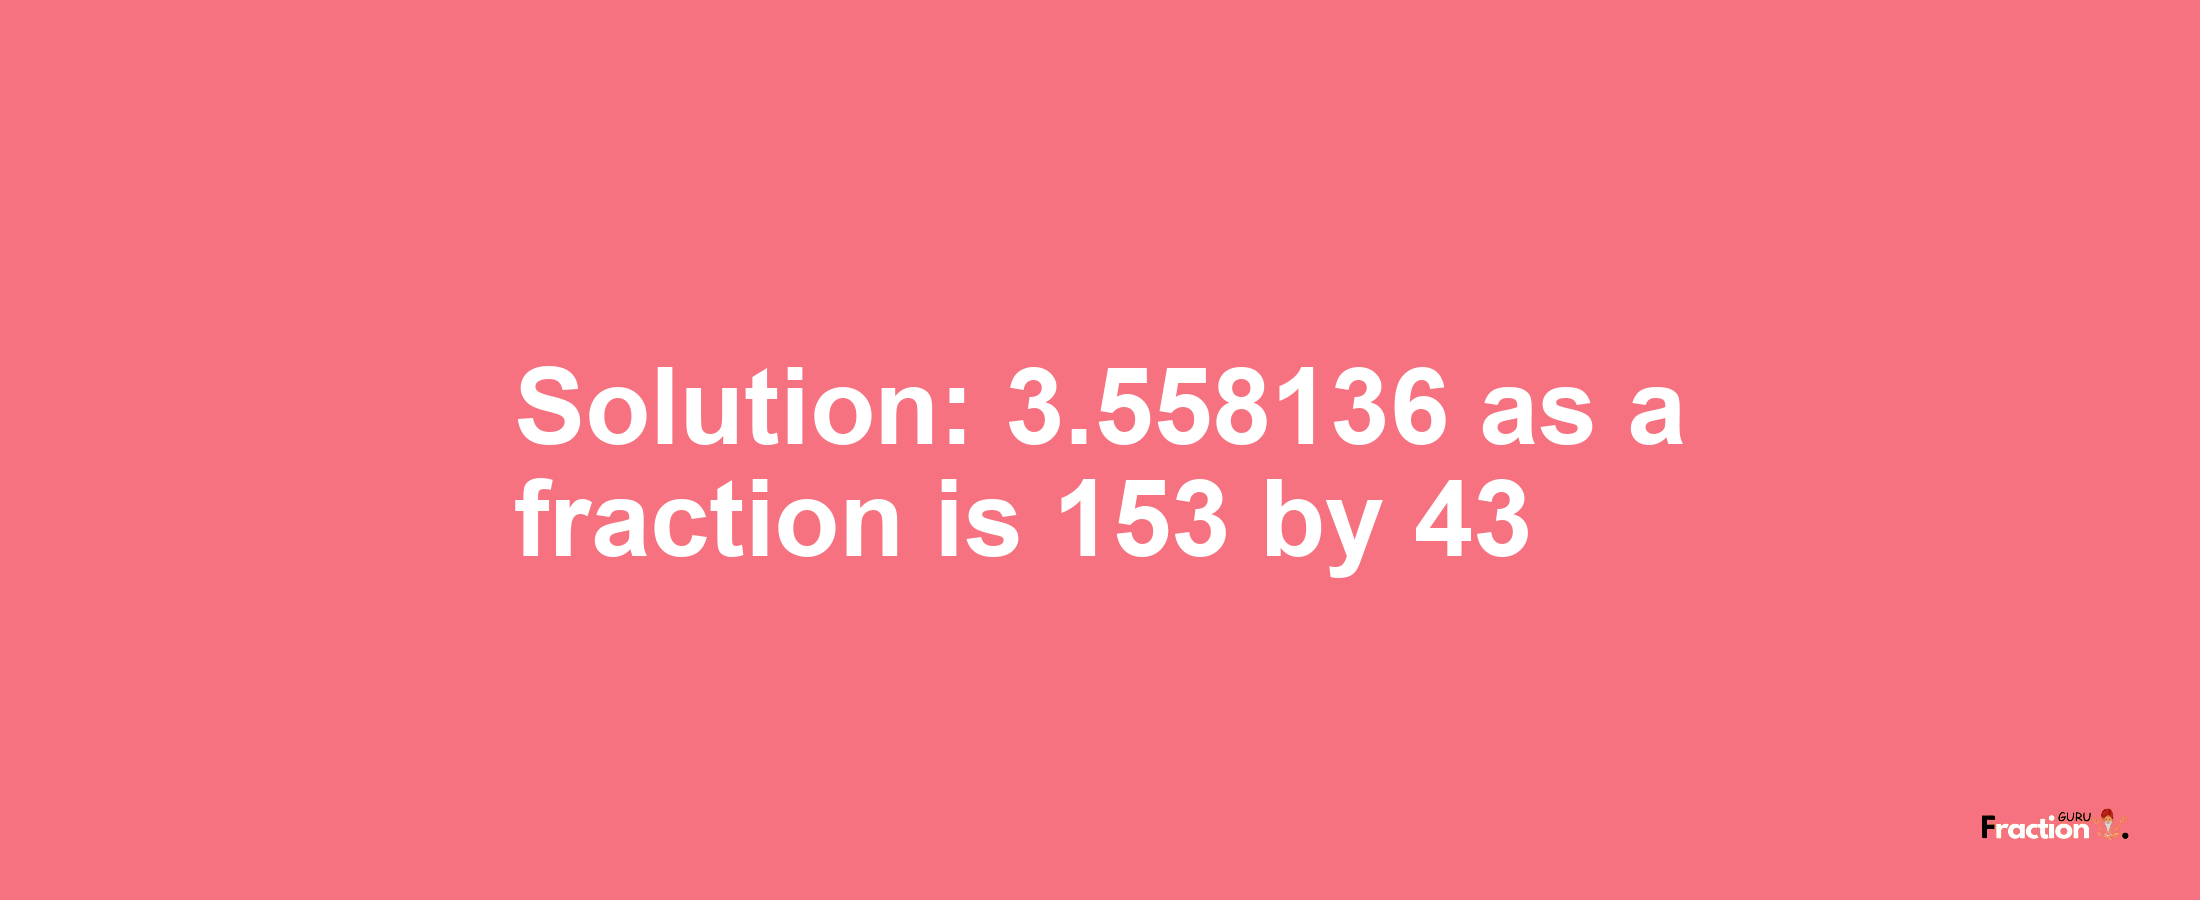 Solution:3.558136 as a fraction is 153/43